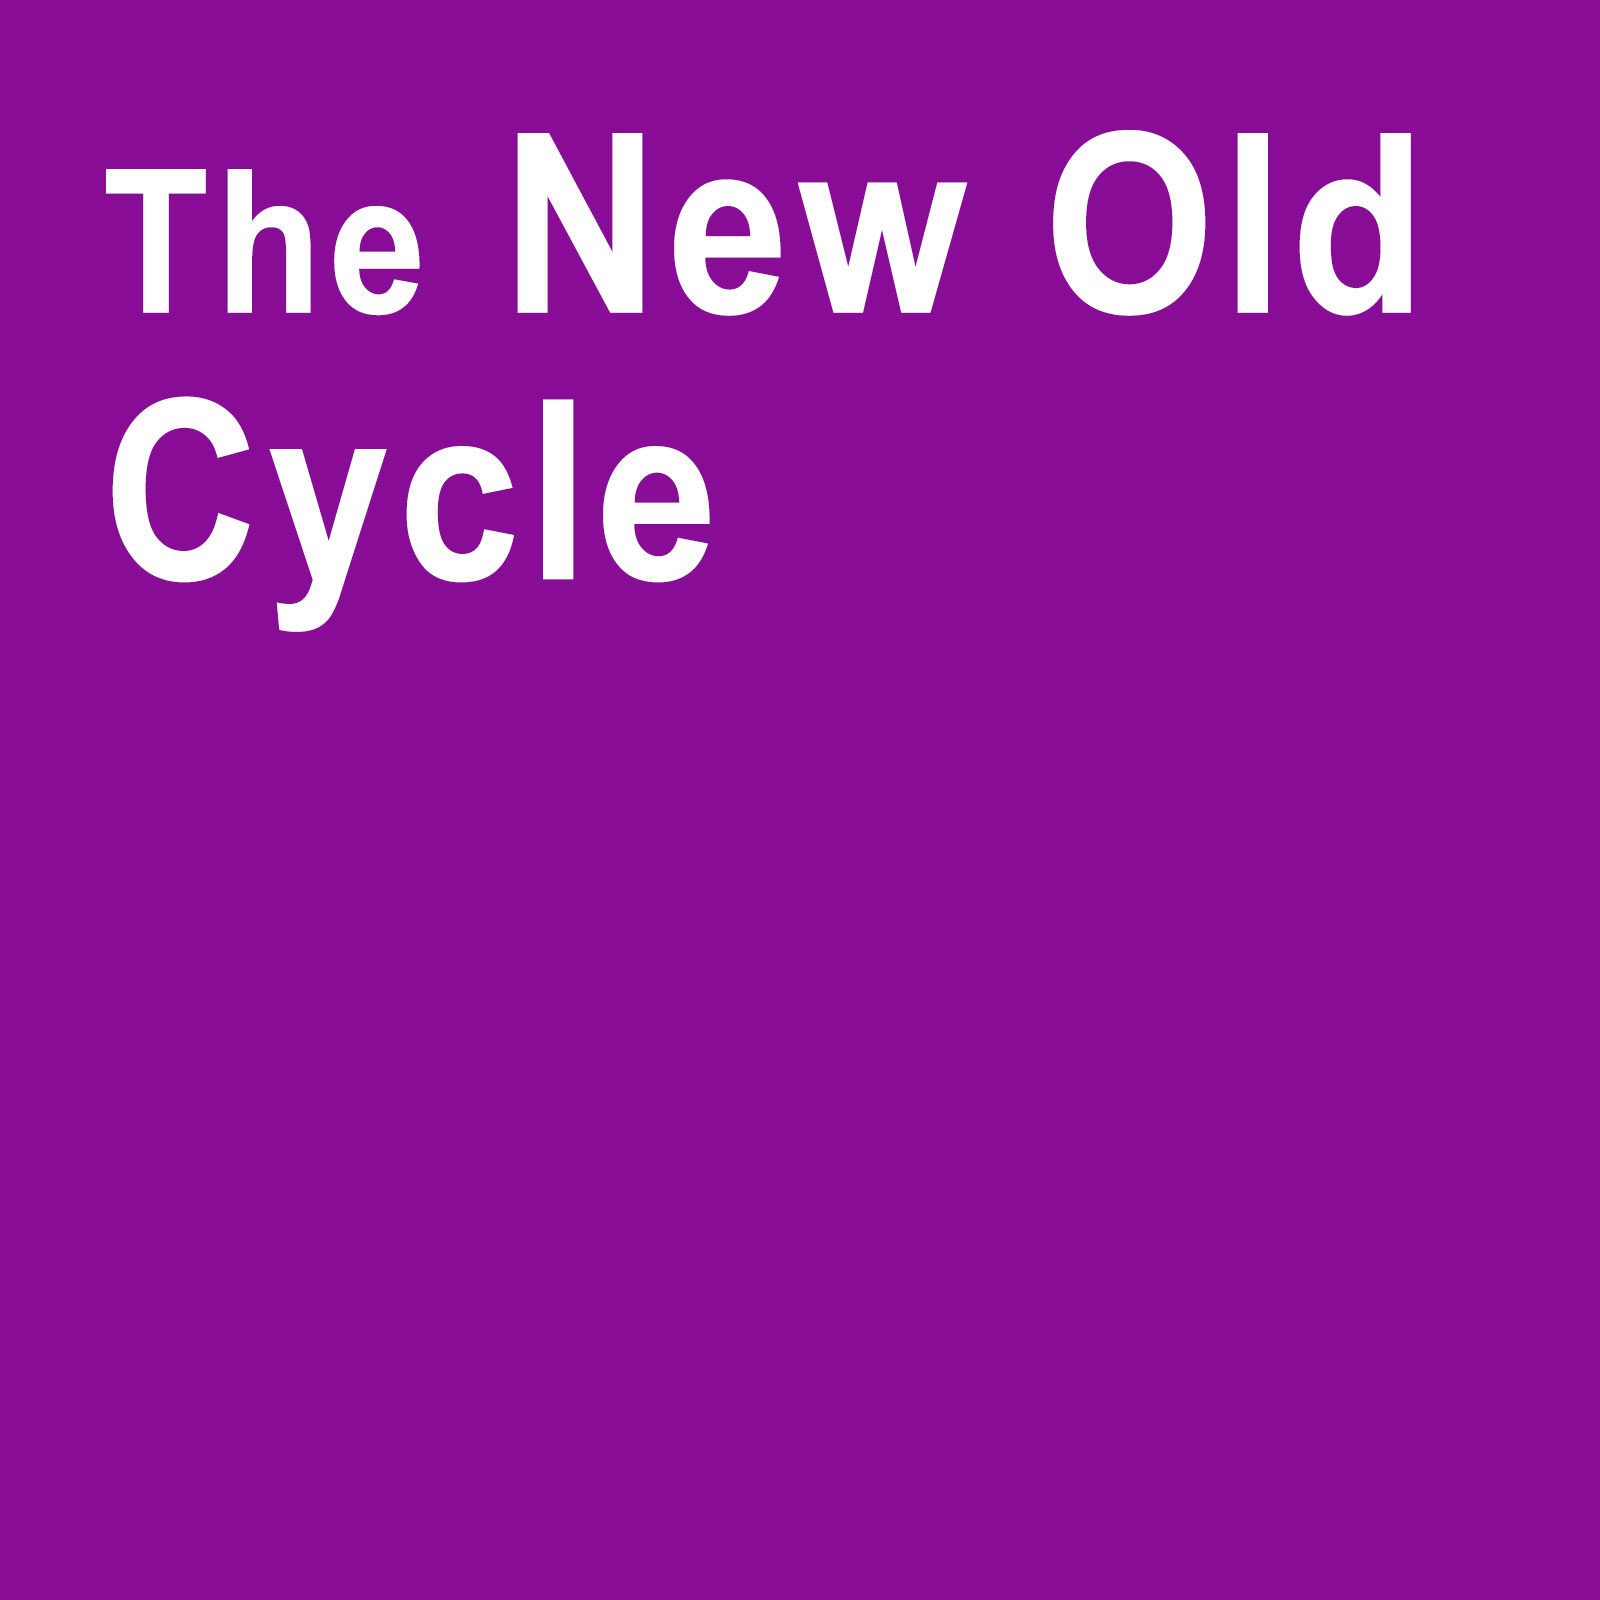 The New Old Cycle